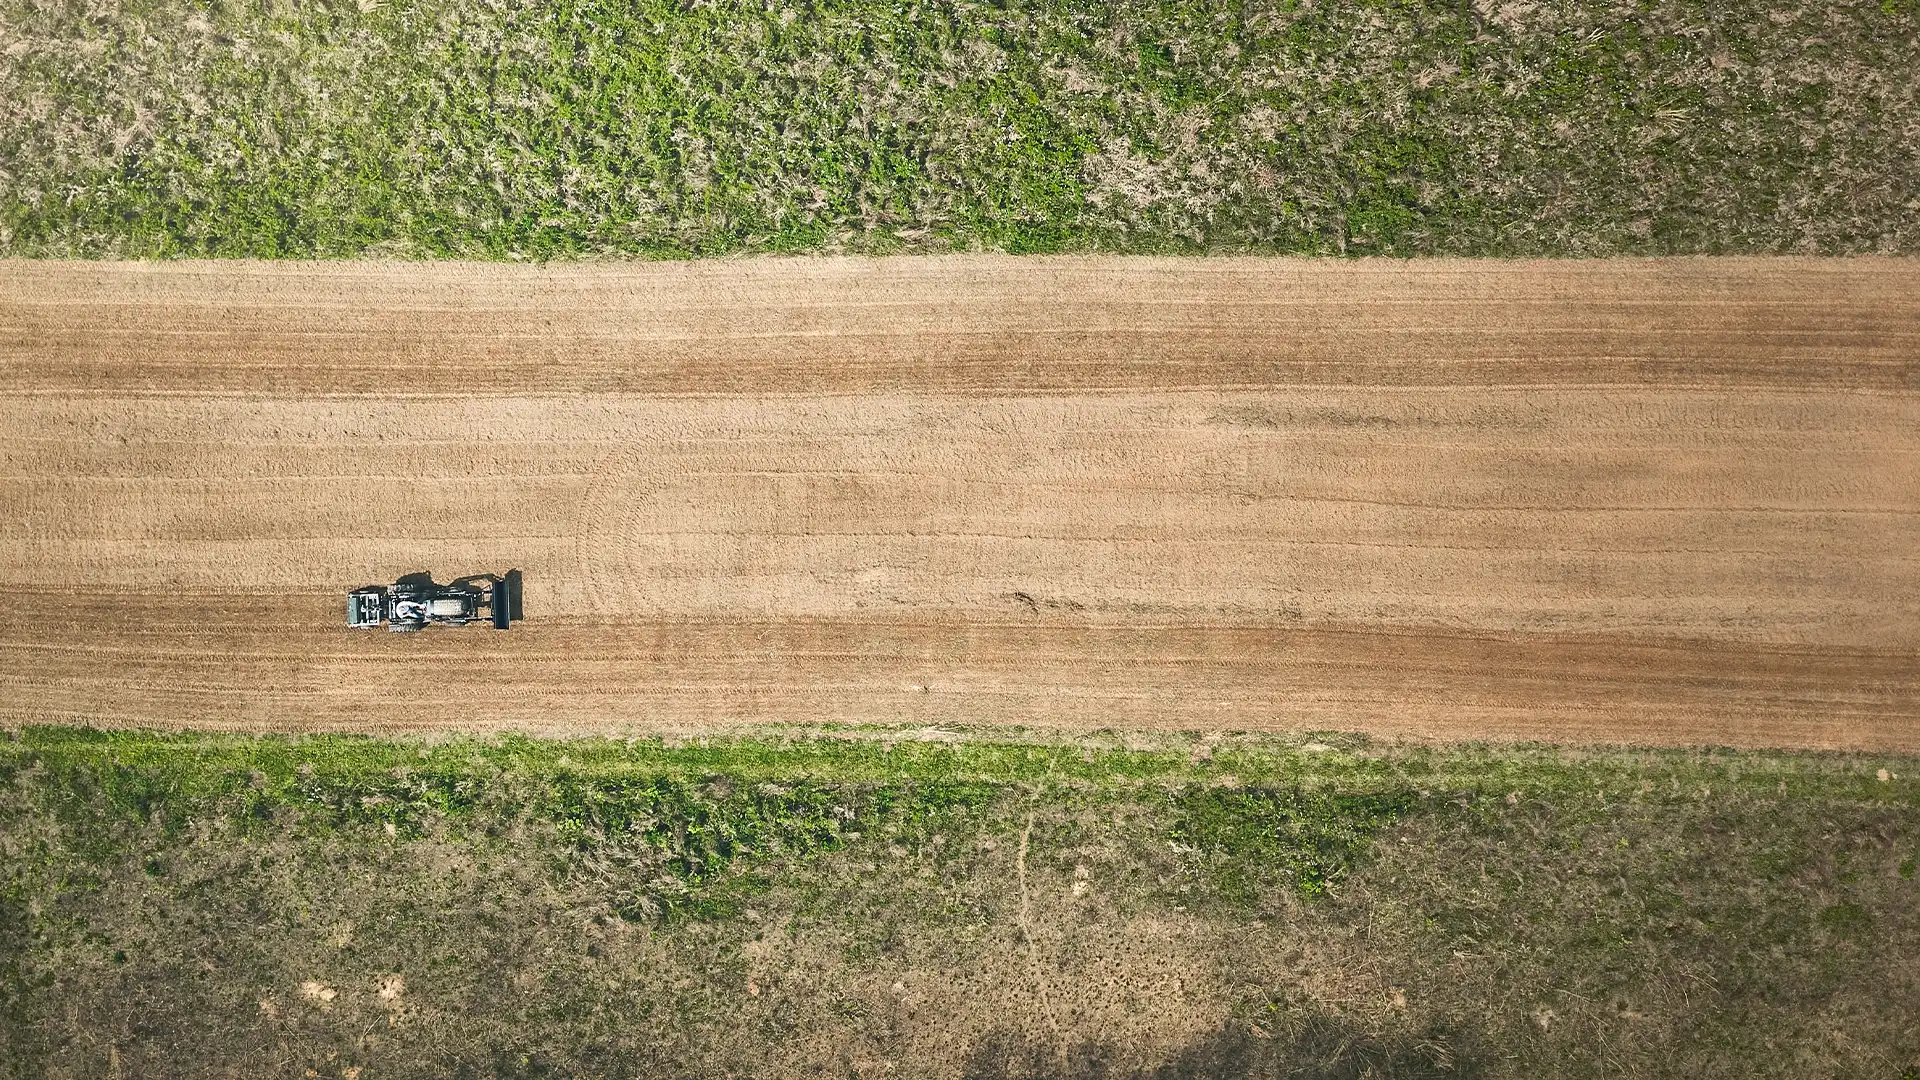 overhead shot of a tractor in a field